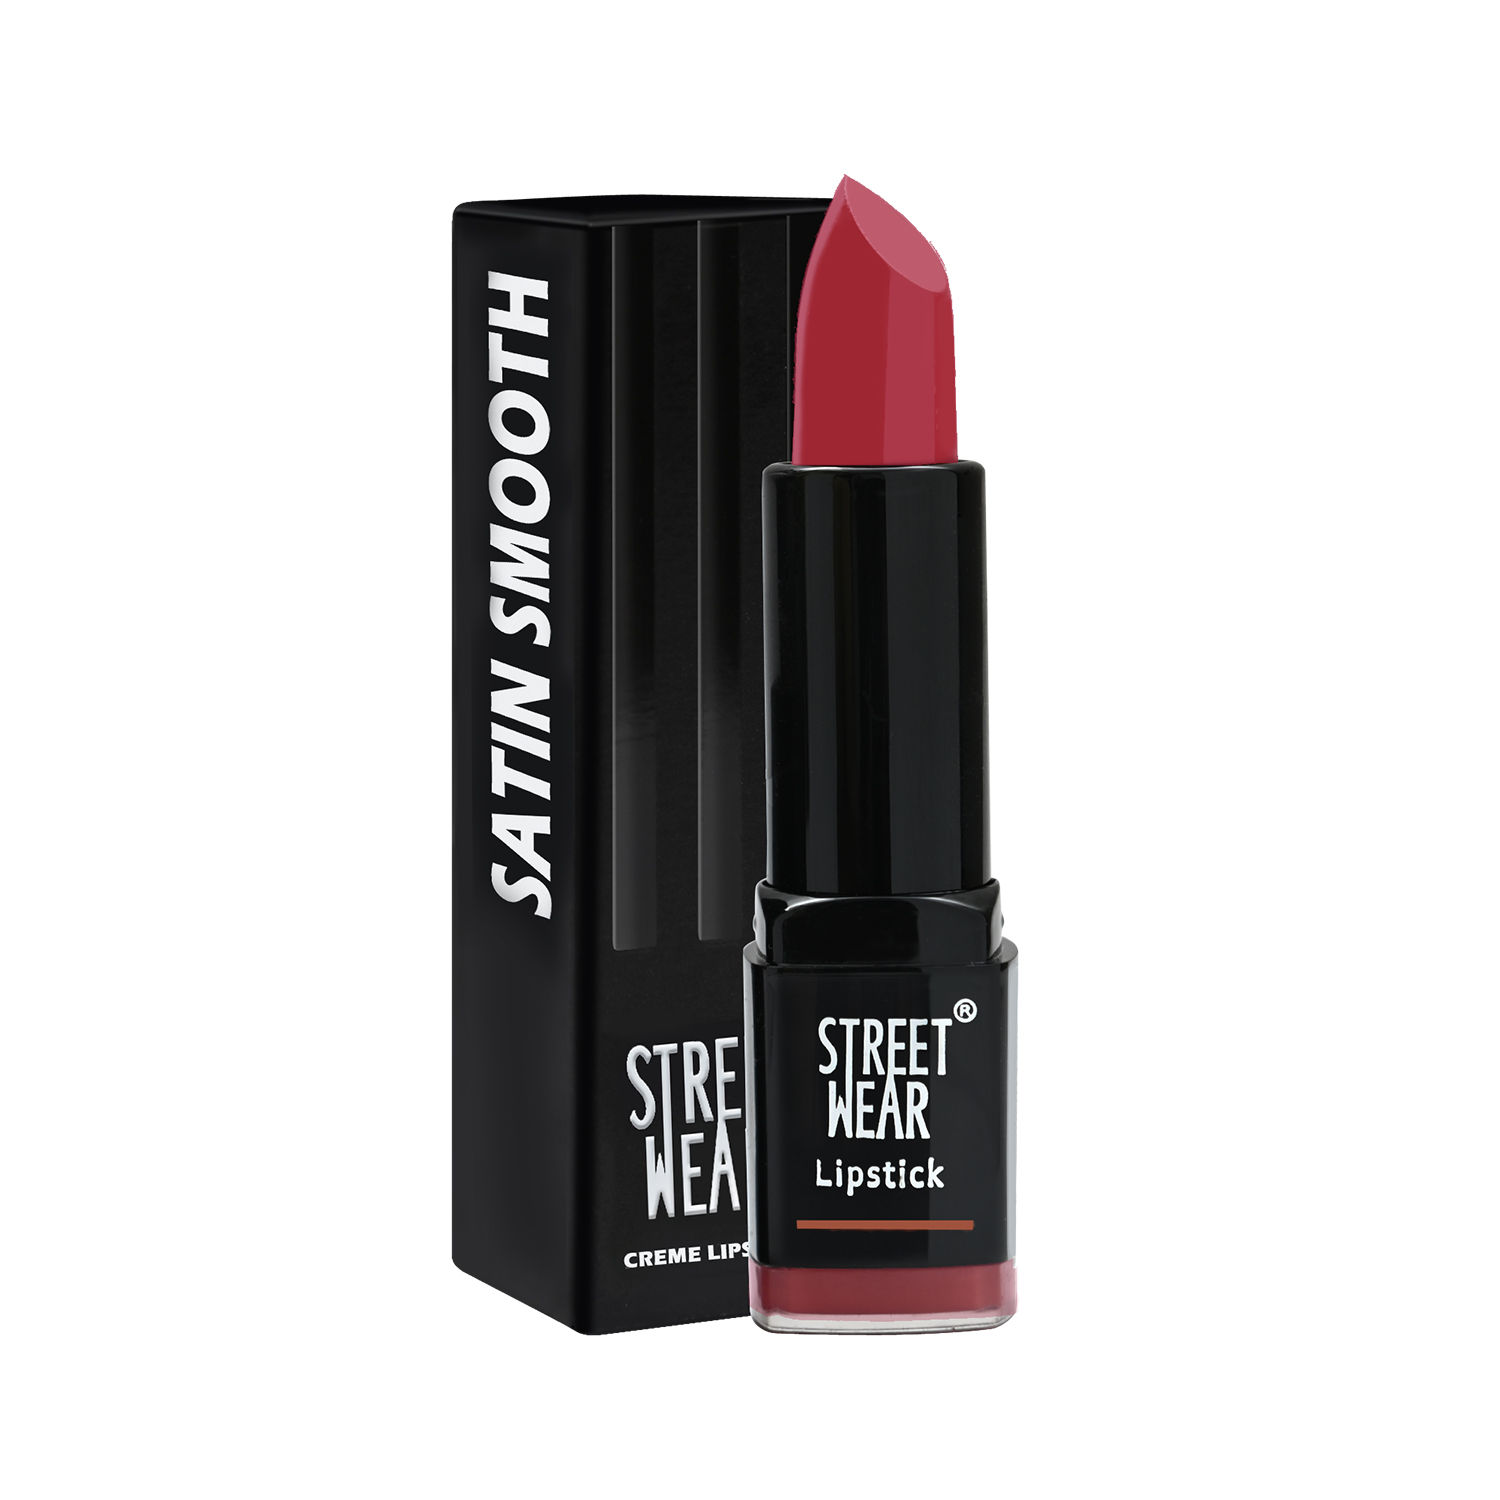 Buy STREET WEAR® Satin Smooth Lipstick -RUBY RED (Red/Maroon) - 4.2 gms - Longwear Creme Lipstick, Moisturizing, Creamy Formuation, 100% Color payoff, Enriched with Aloe vera, Vitamin E and Shea Butter - Purplle